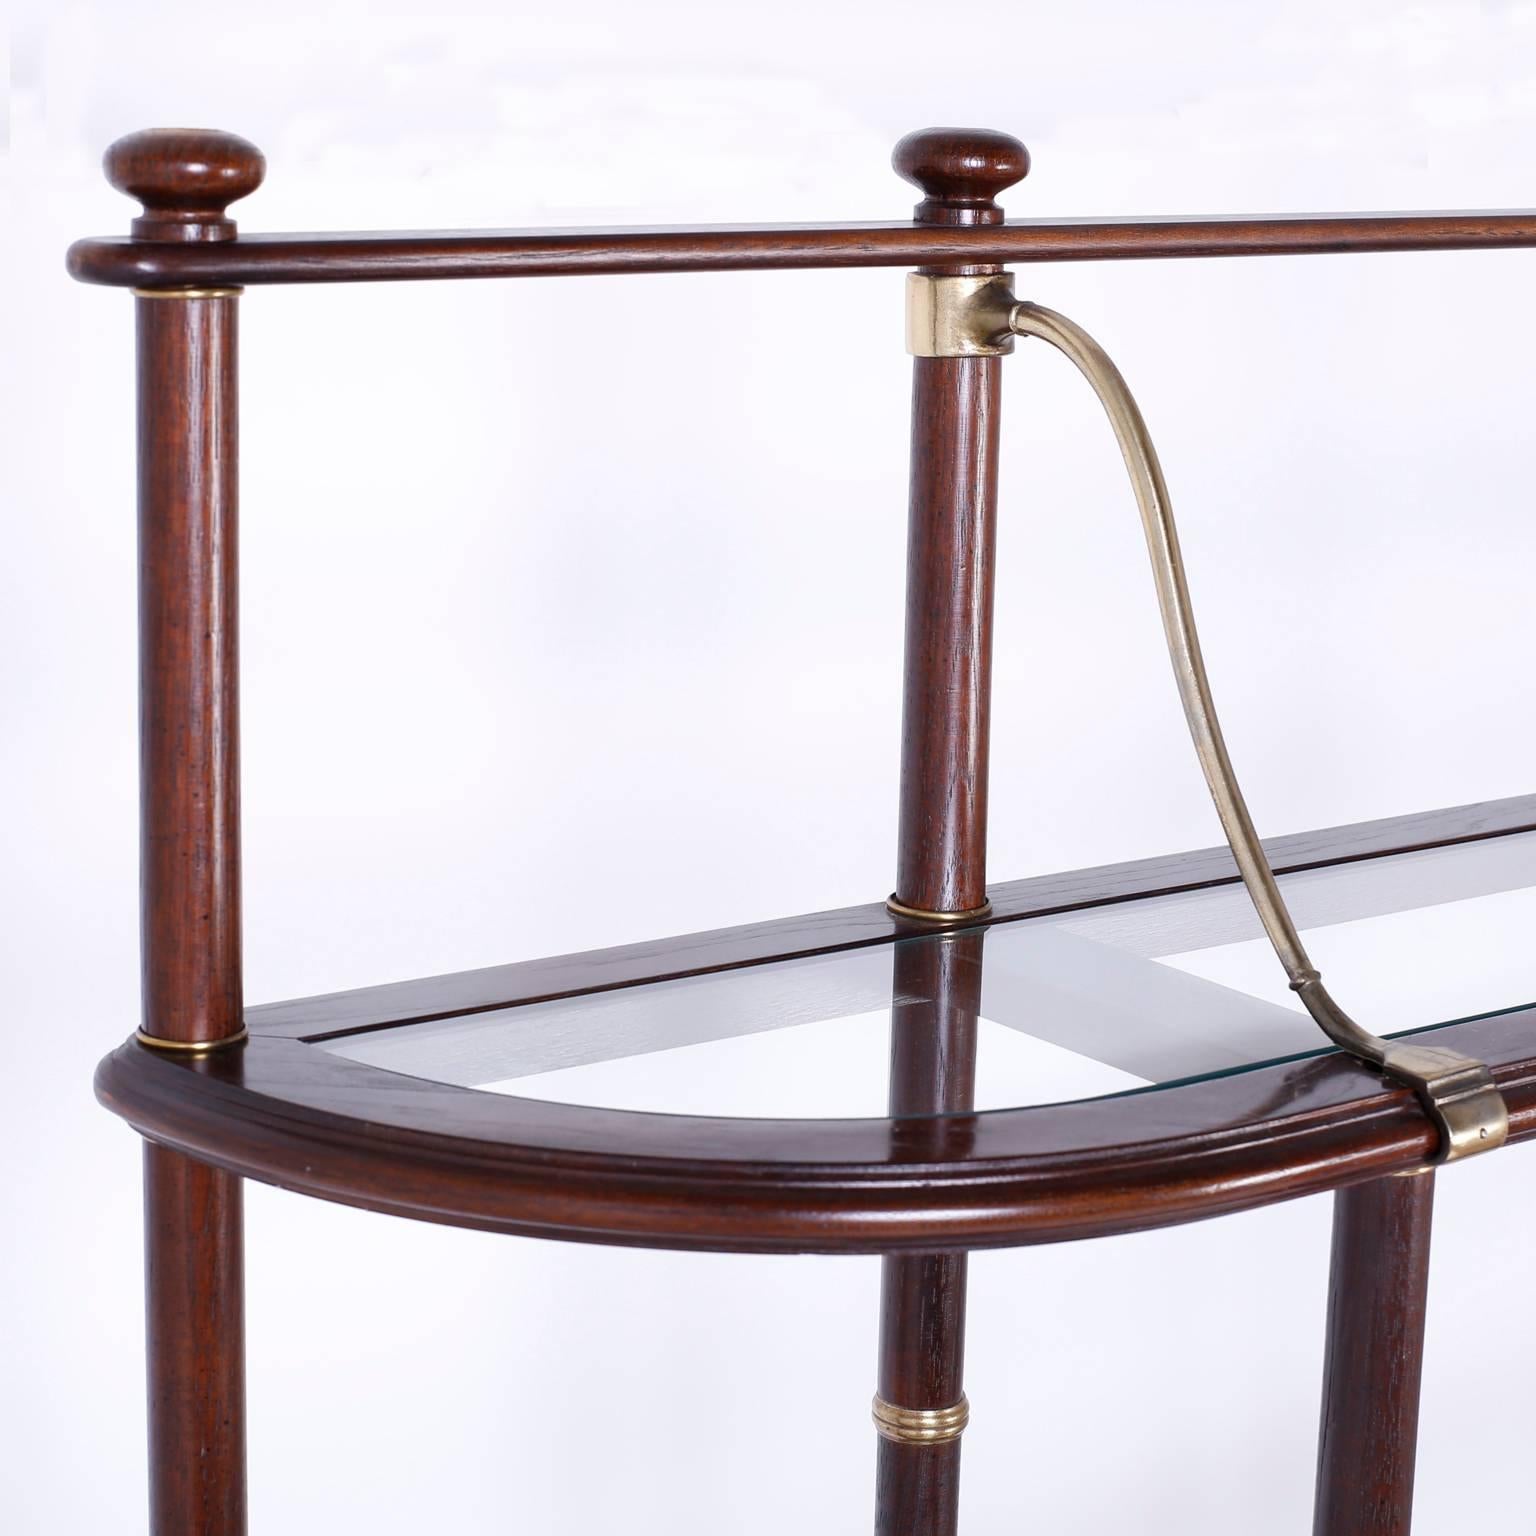 American Regency Style Mahogany Étagère or Shelf with Faux Bamboo Accents